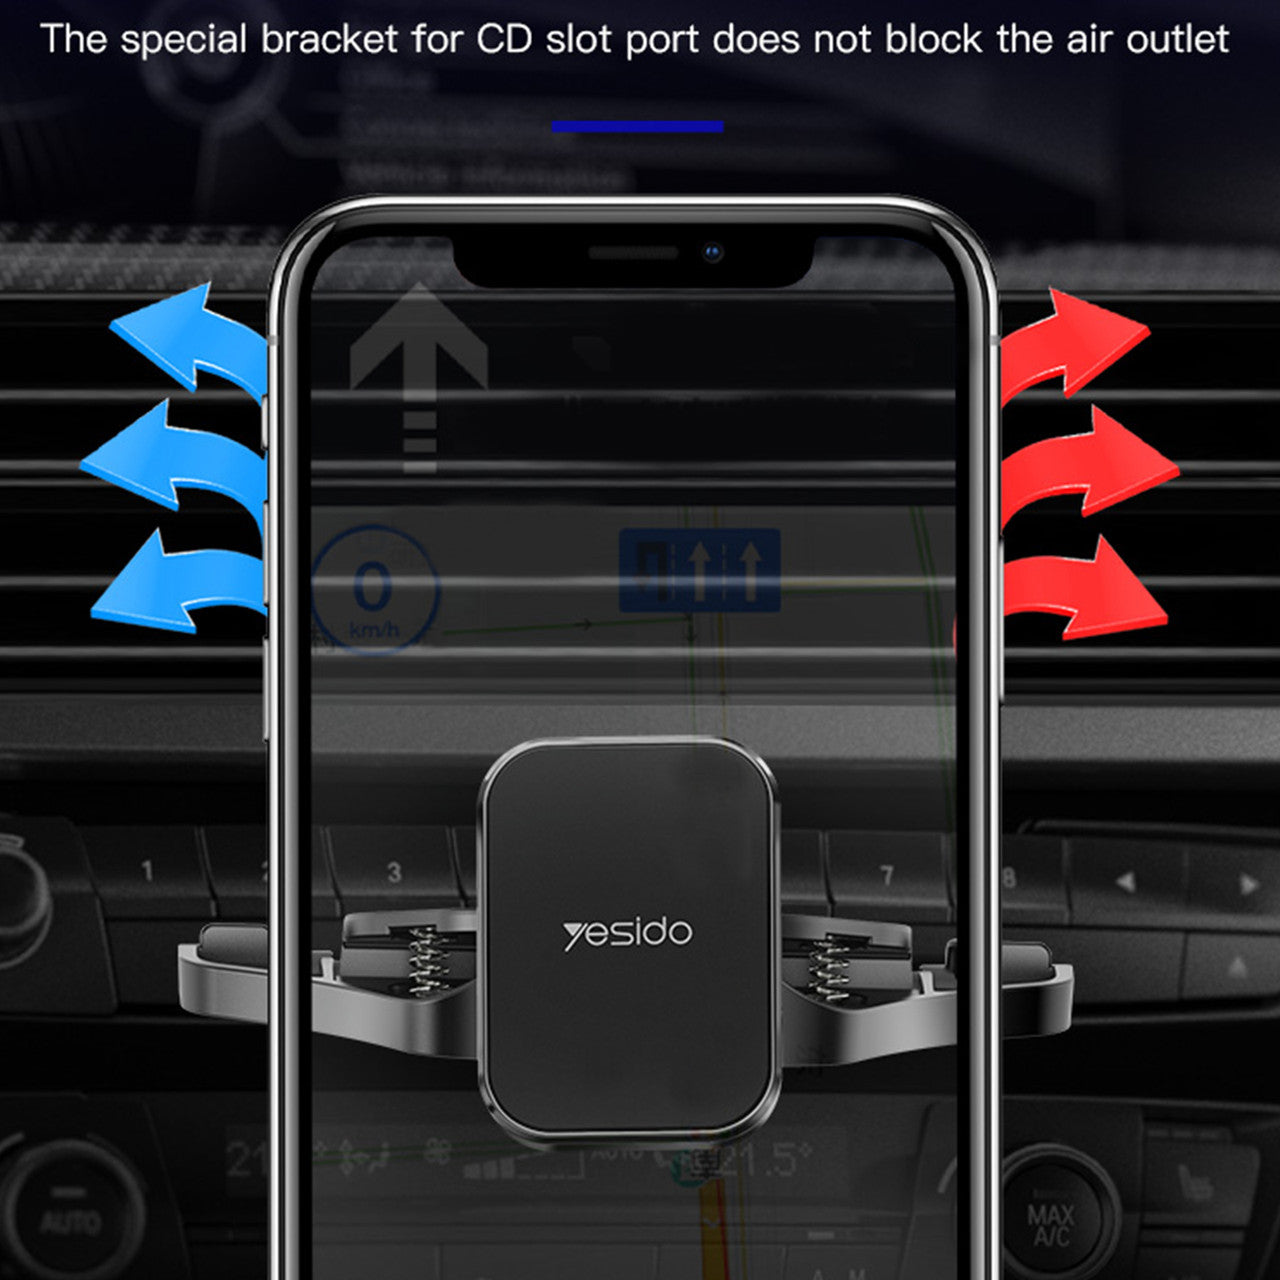 Universal Magnetic CD Slot Car Phone Mount, CD Player Phone Mount, Hands-Free Car Phone Holder with One Hand Operation Design, Compatible iPhone 12 Pro Max11/11Pro/Xs MAX/XR/XS/X/8, Galaxy S10/S10+/S9